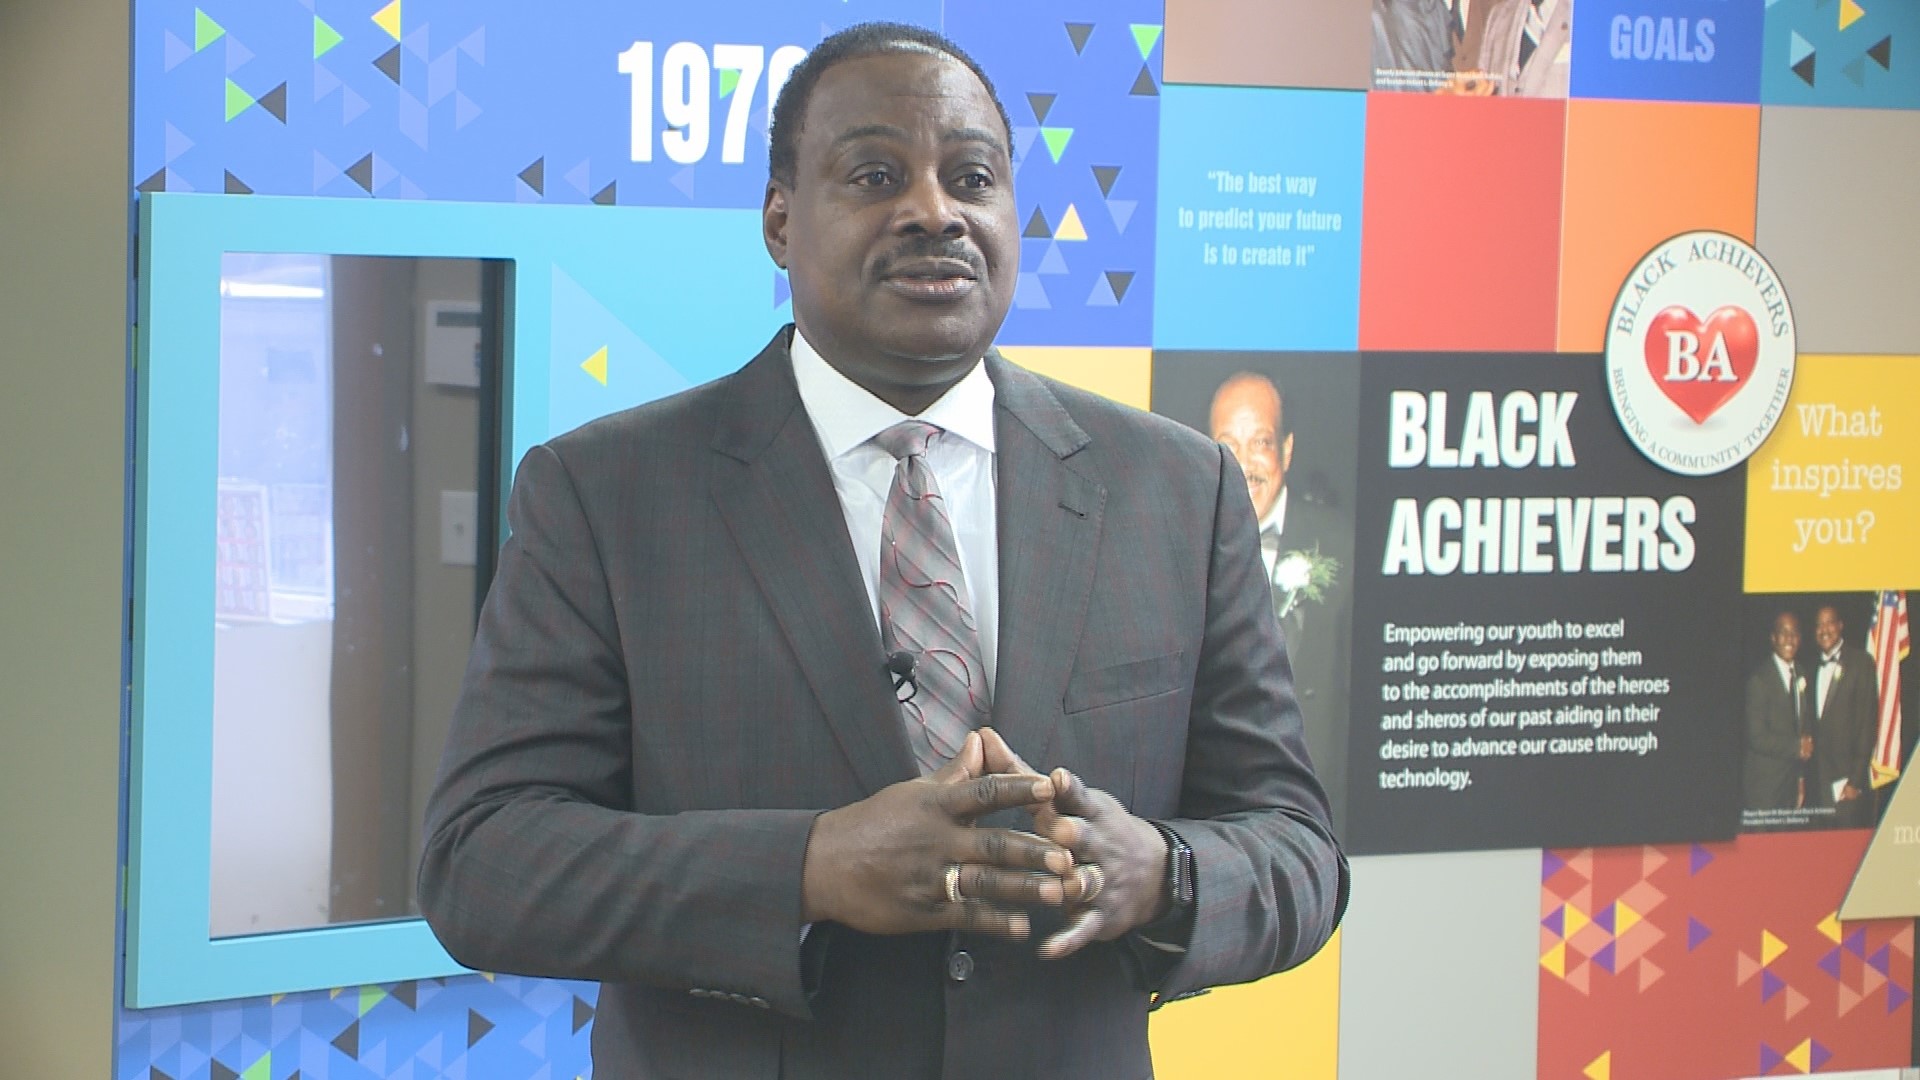 When it comes to lifting up Buffalo's African-American community, Herb Bellamy, Jr., doesn't just talk the talk, he walks the walk.